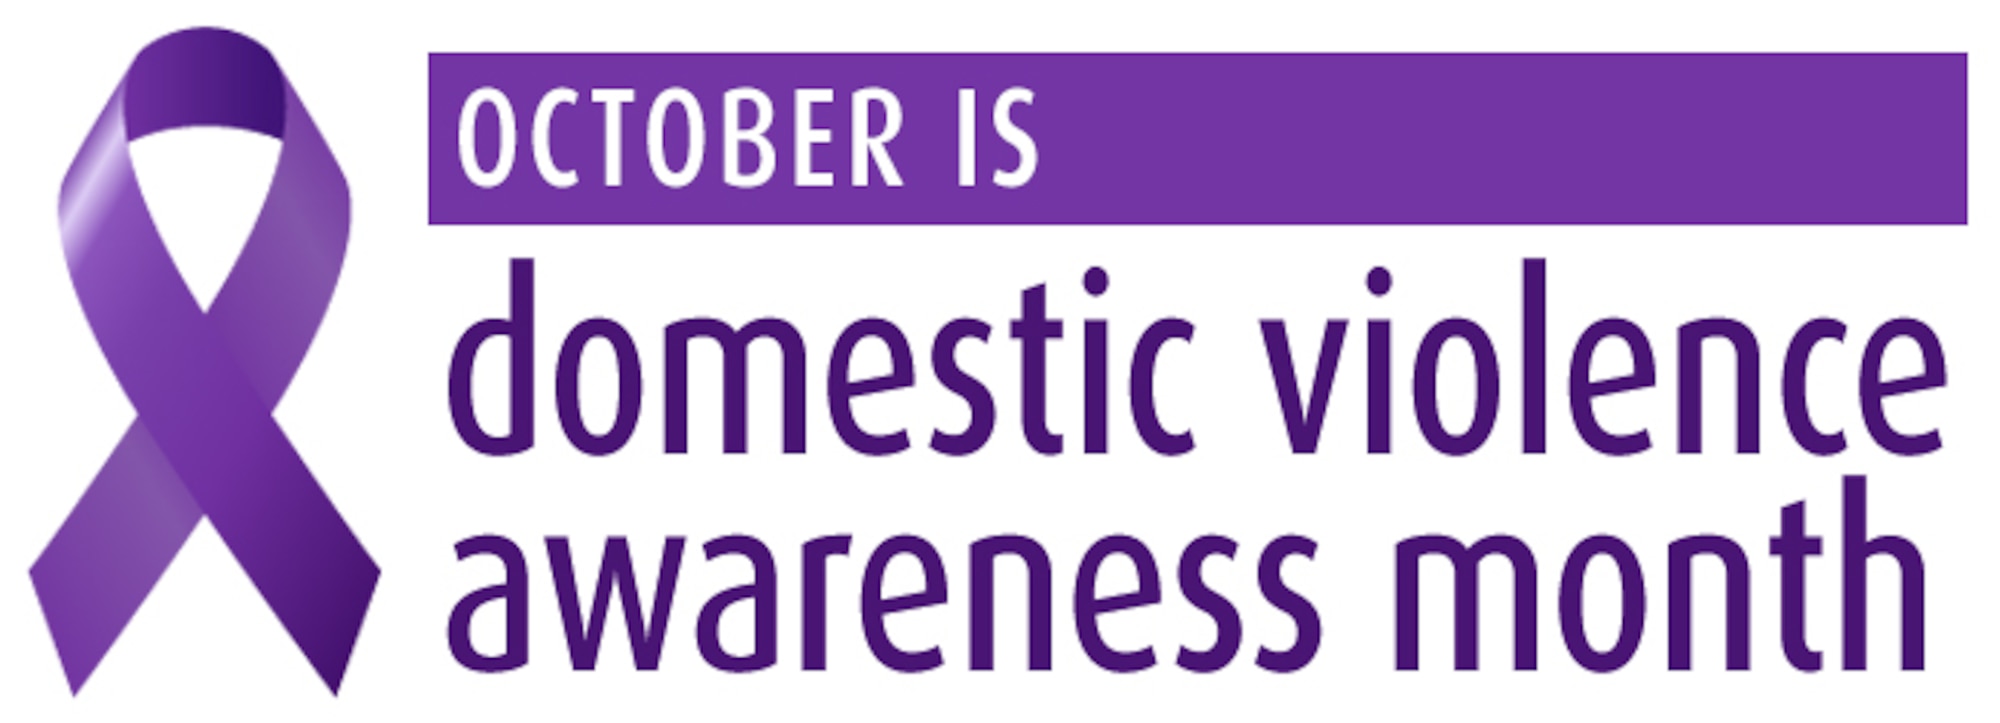 National Domestic Violence Awareness Month has been recognized every October for the last 31 years as a time when people and communities across the United States honor those who have lost their lives to domestic violence.